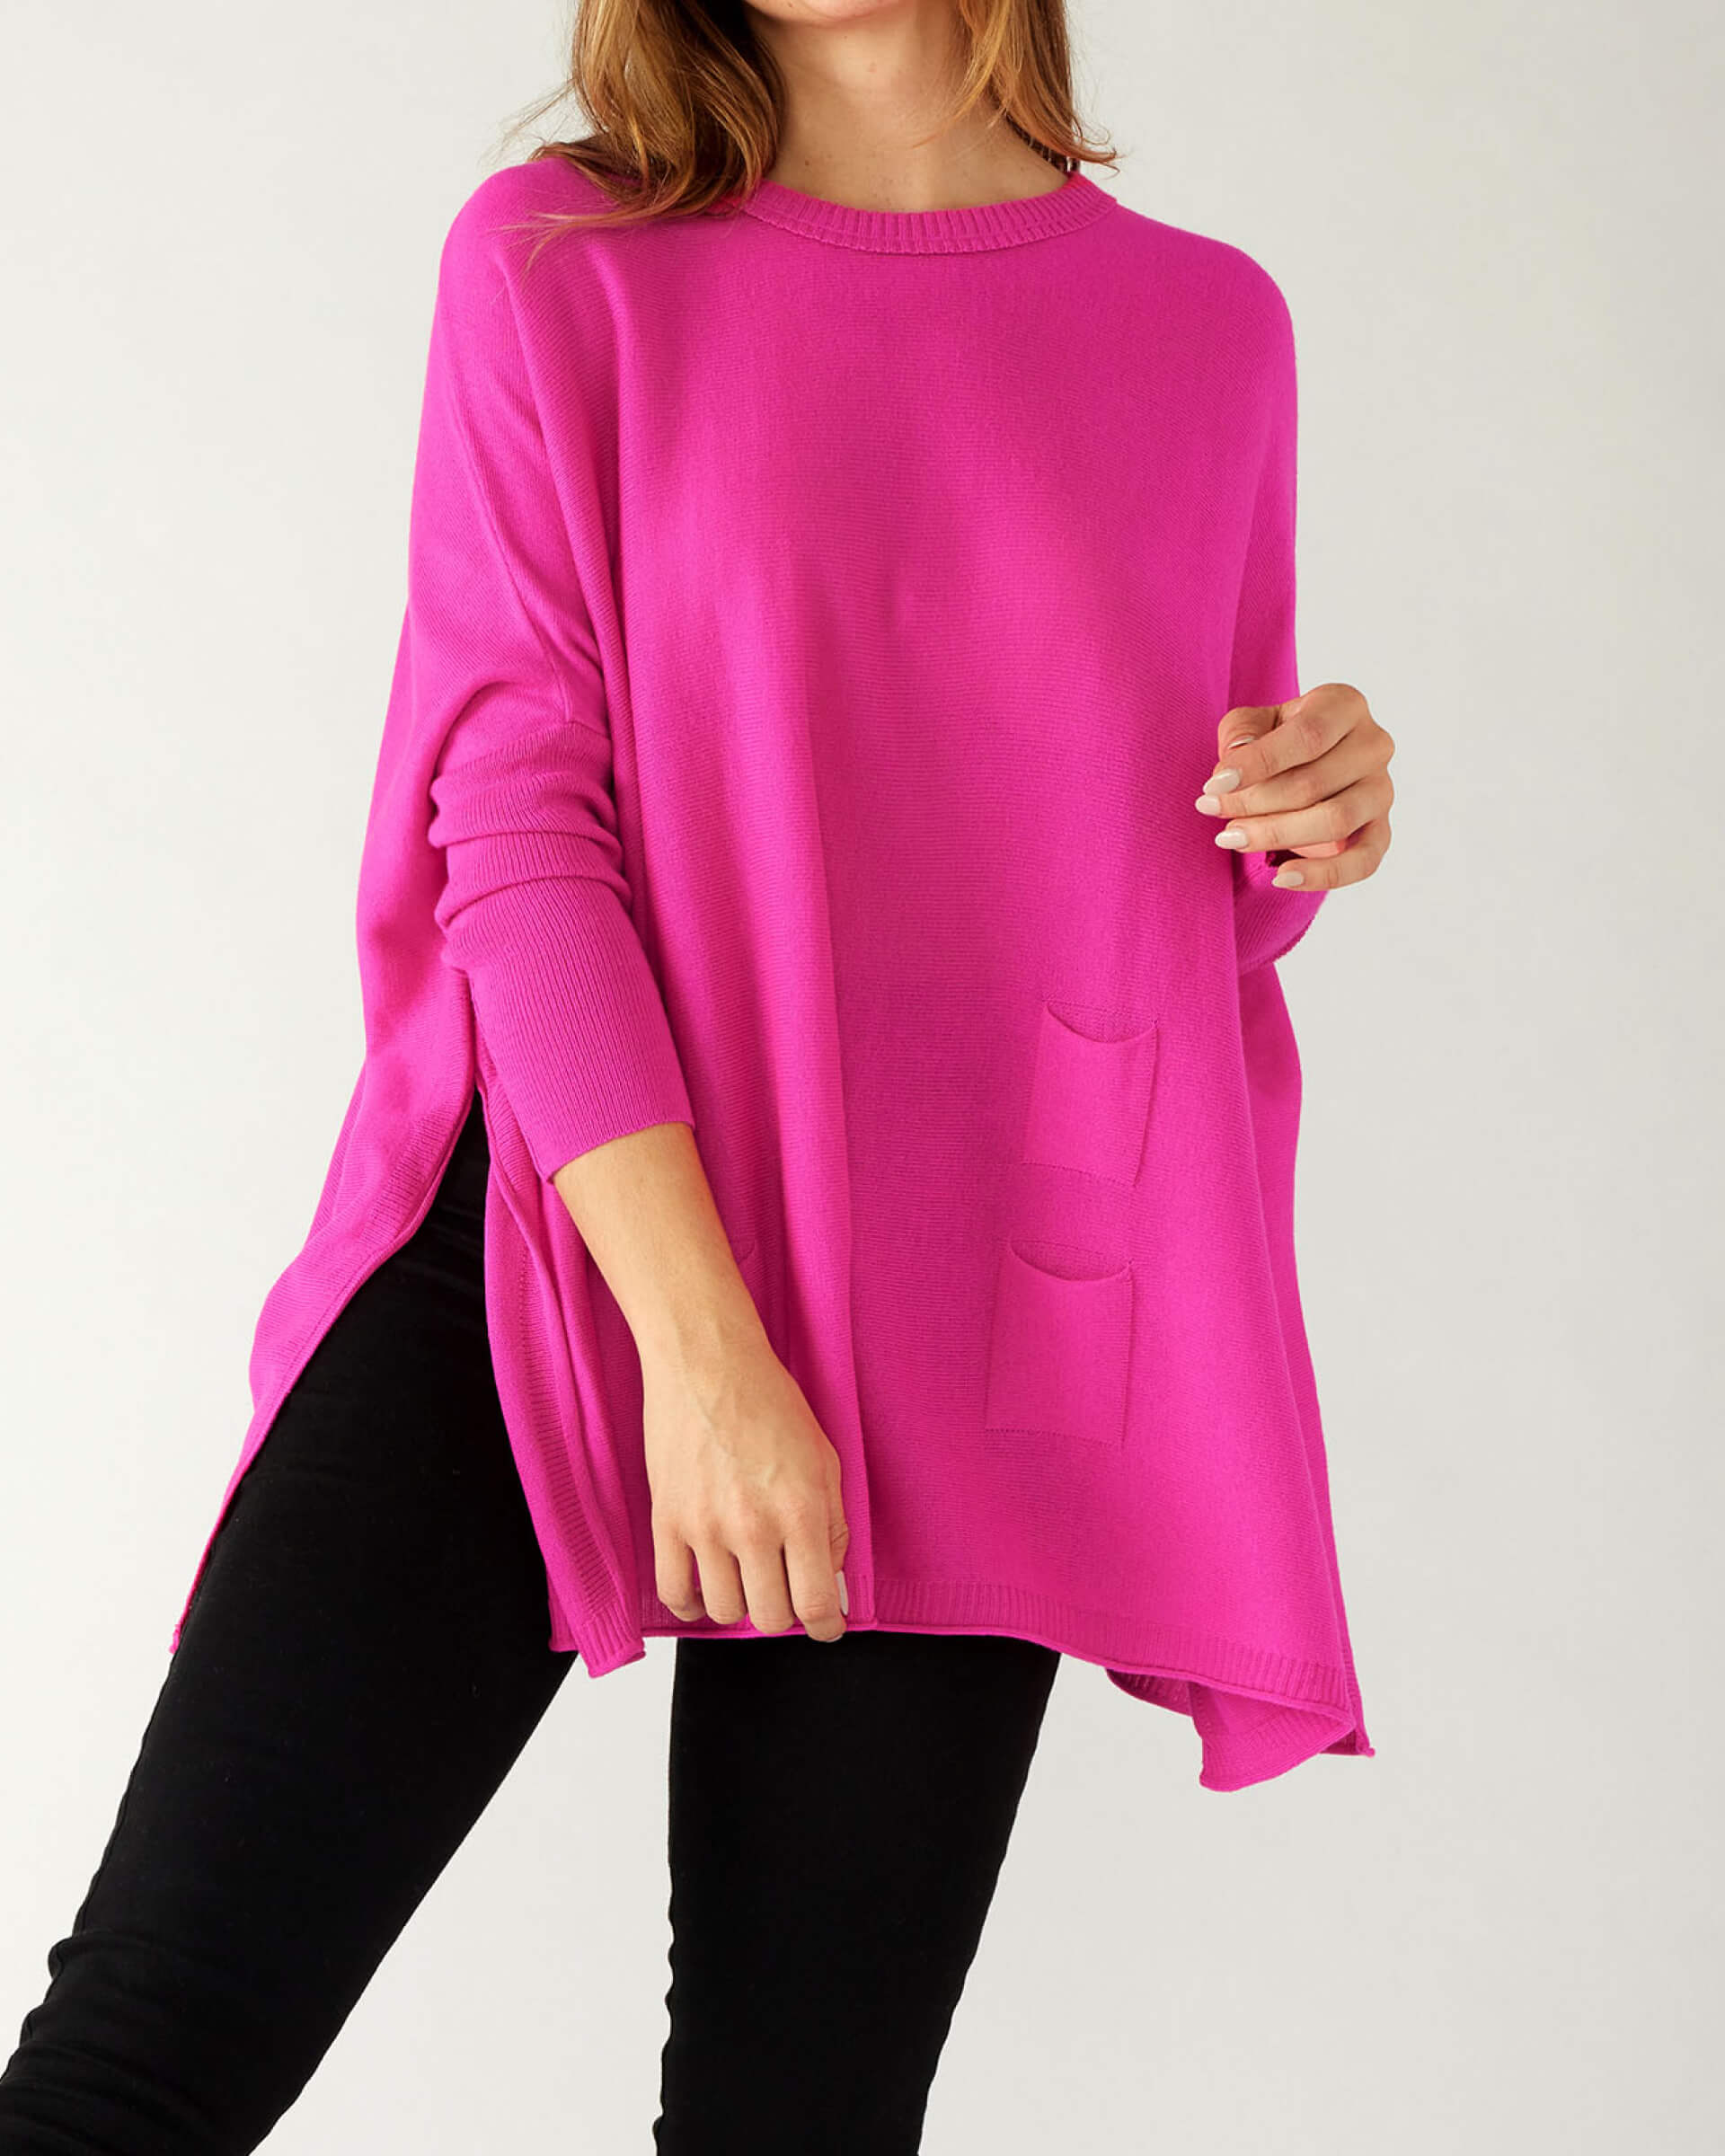 Women's Oversized Crewneck Knit Sweater in Hot Pink Chest View